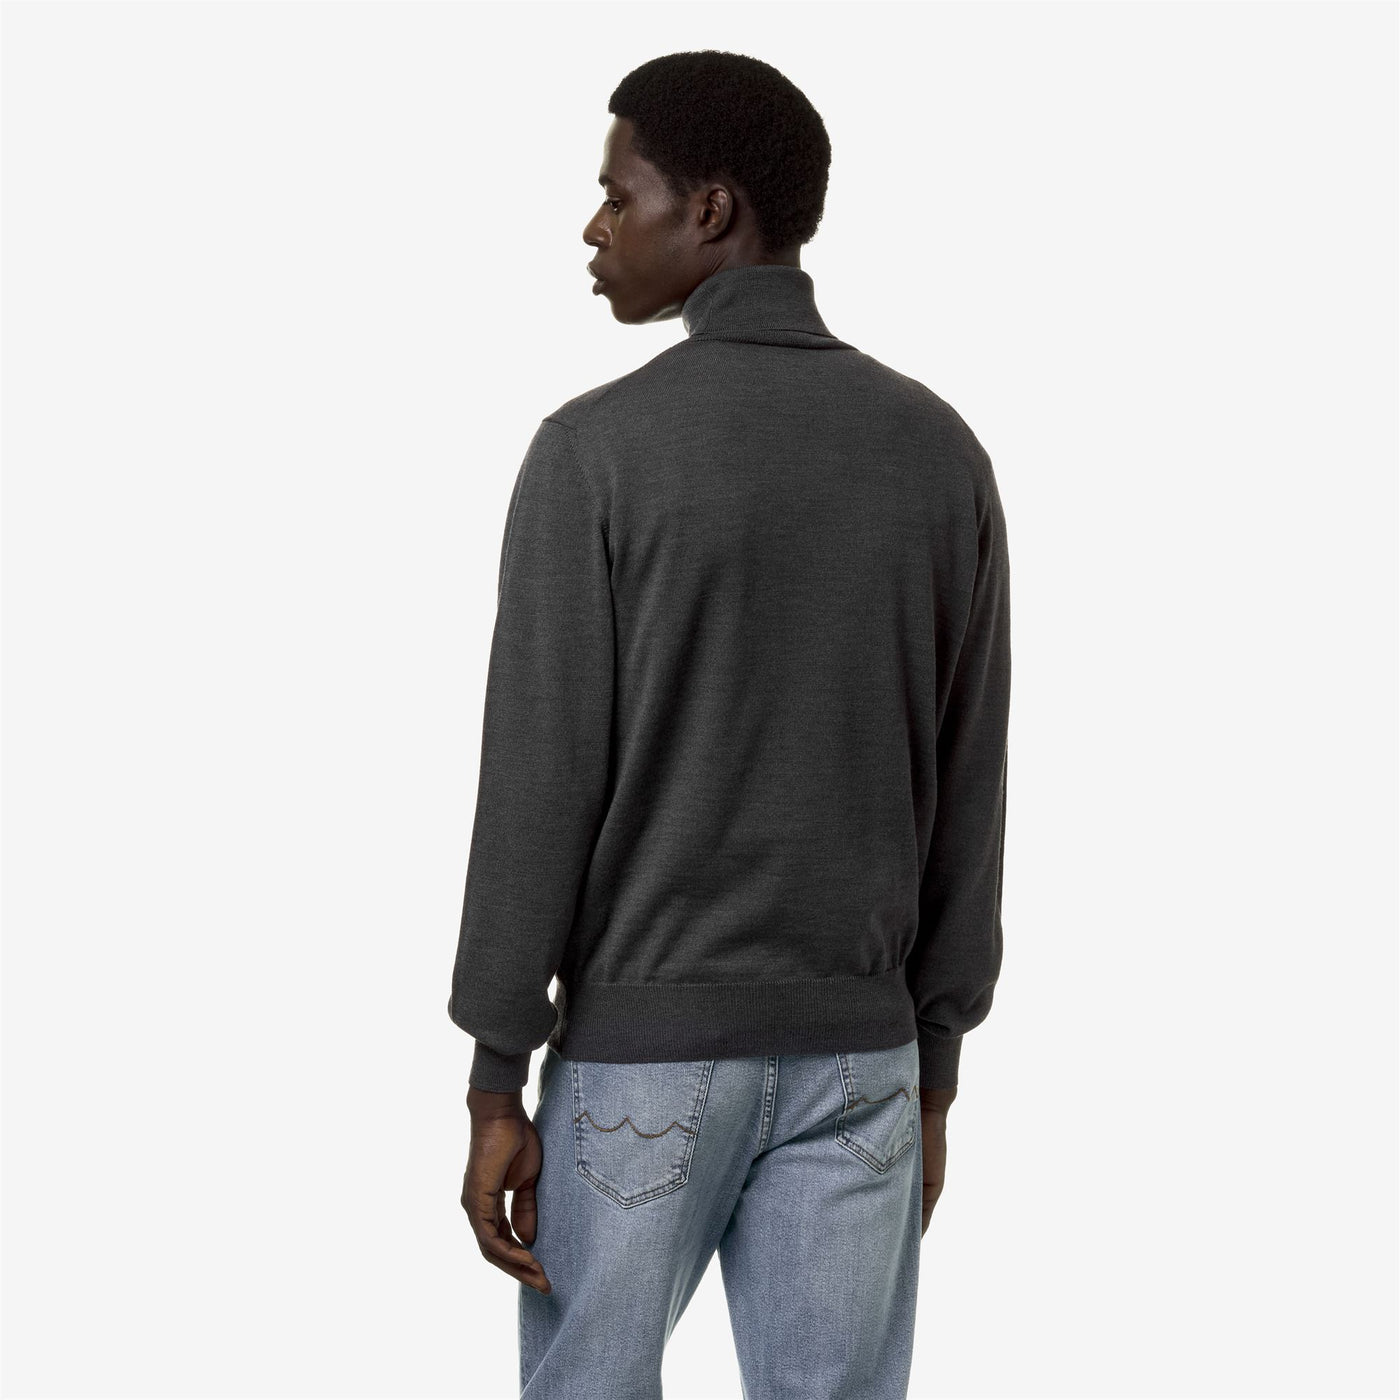 Knitwear Man HENRY MERINO Pull  Over GREY MD MEL Dressed Front Double		